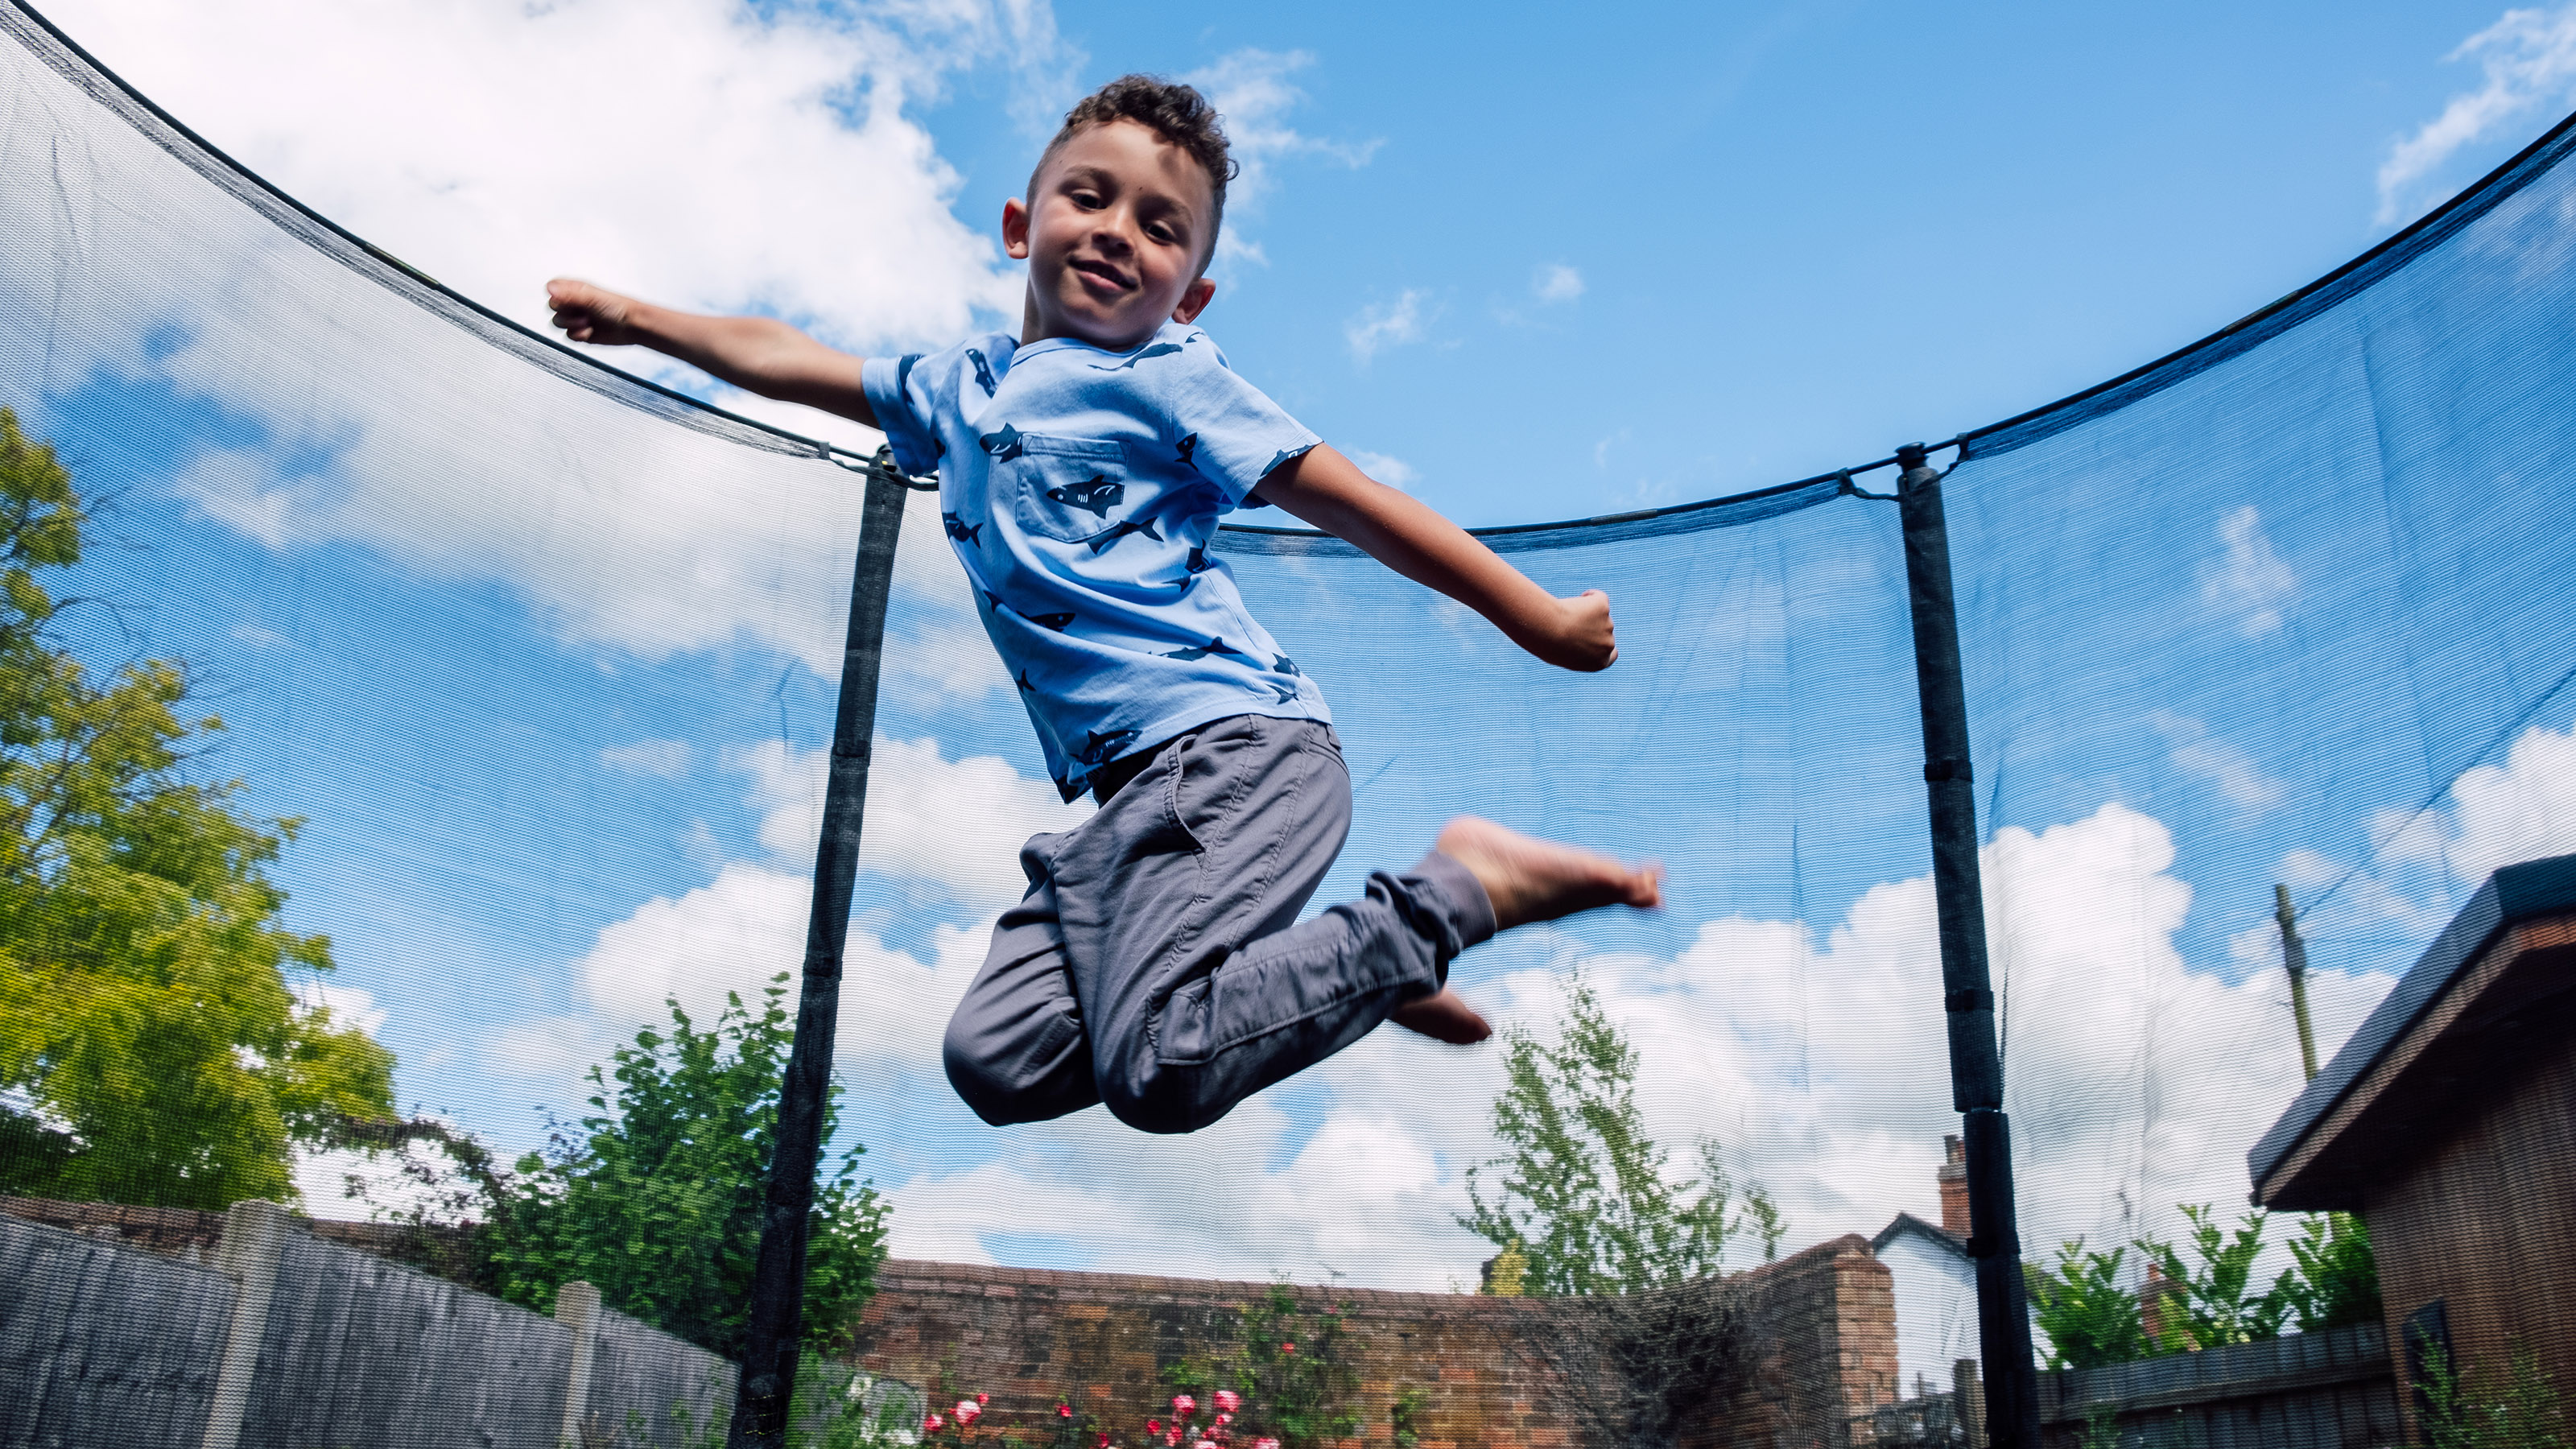 Safety tips for in-ground trampolines